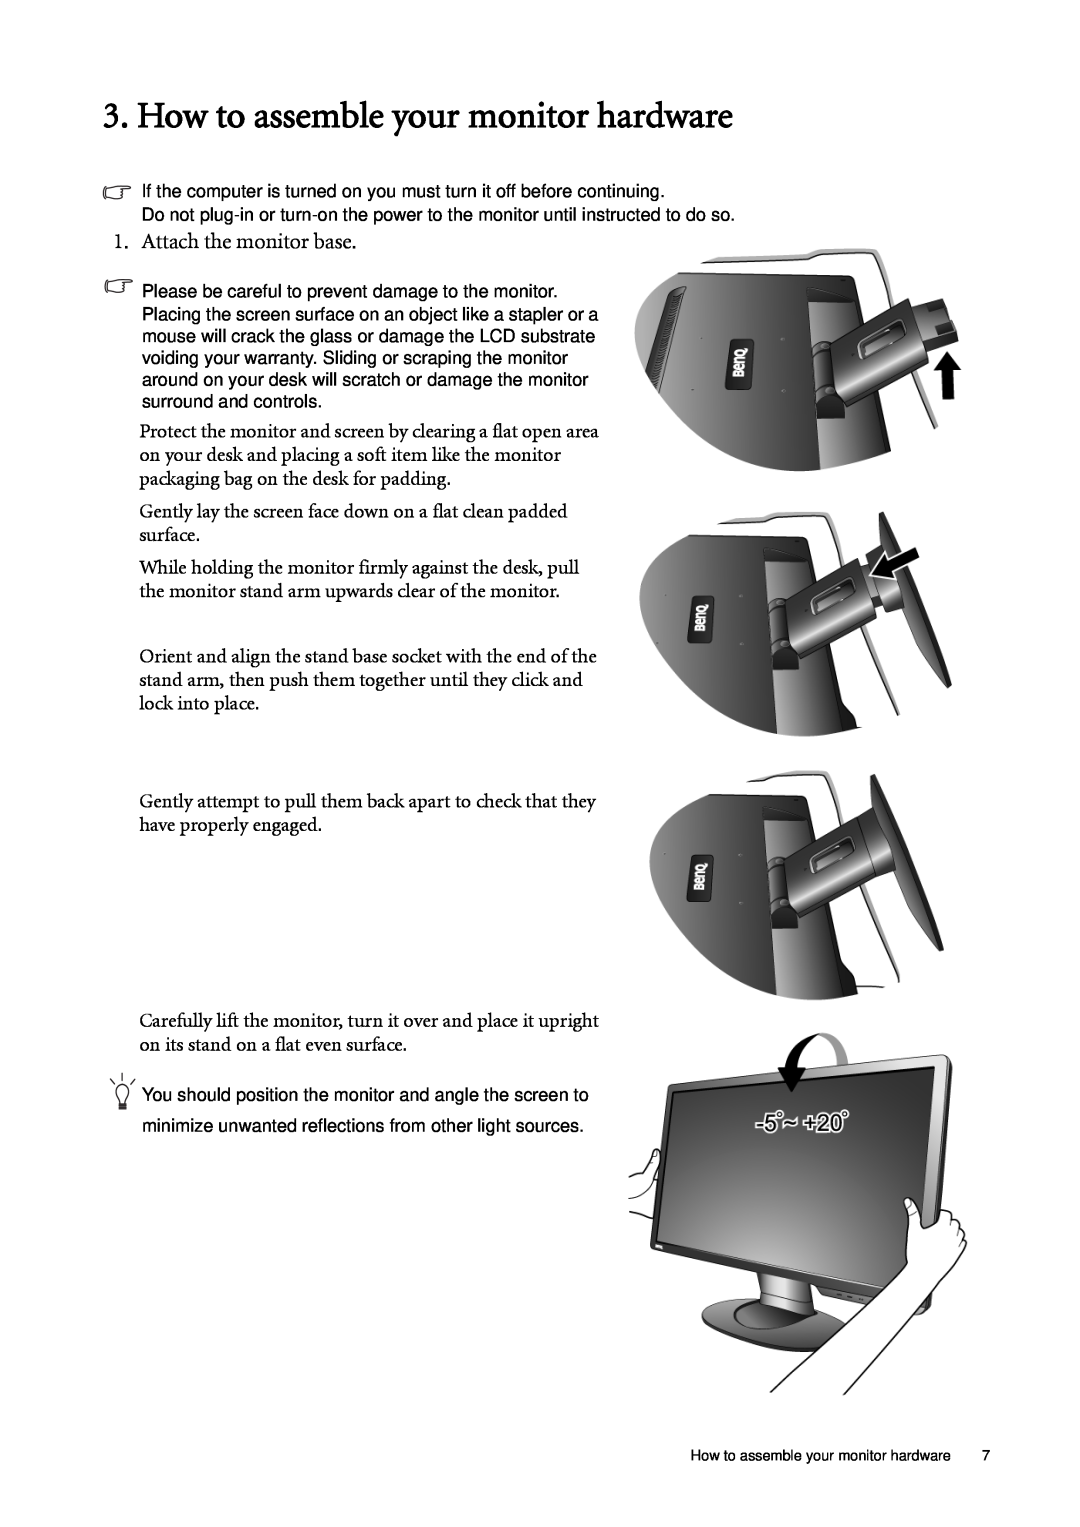 BenQ G920WL, G920WAL user manual How to assemble your monitor hardware, Attach the monitor base 